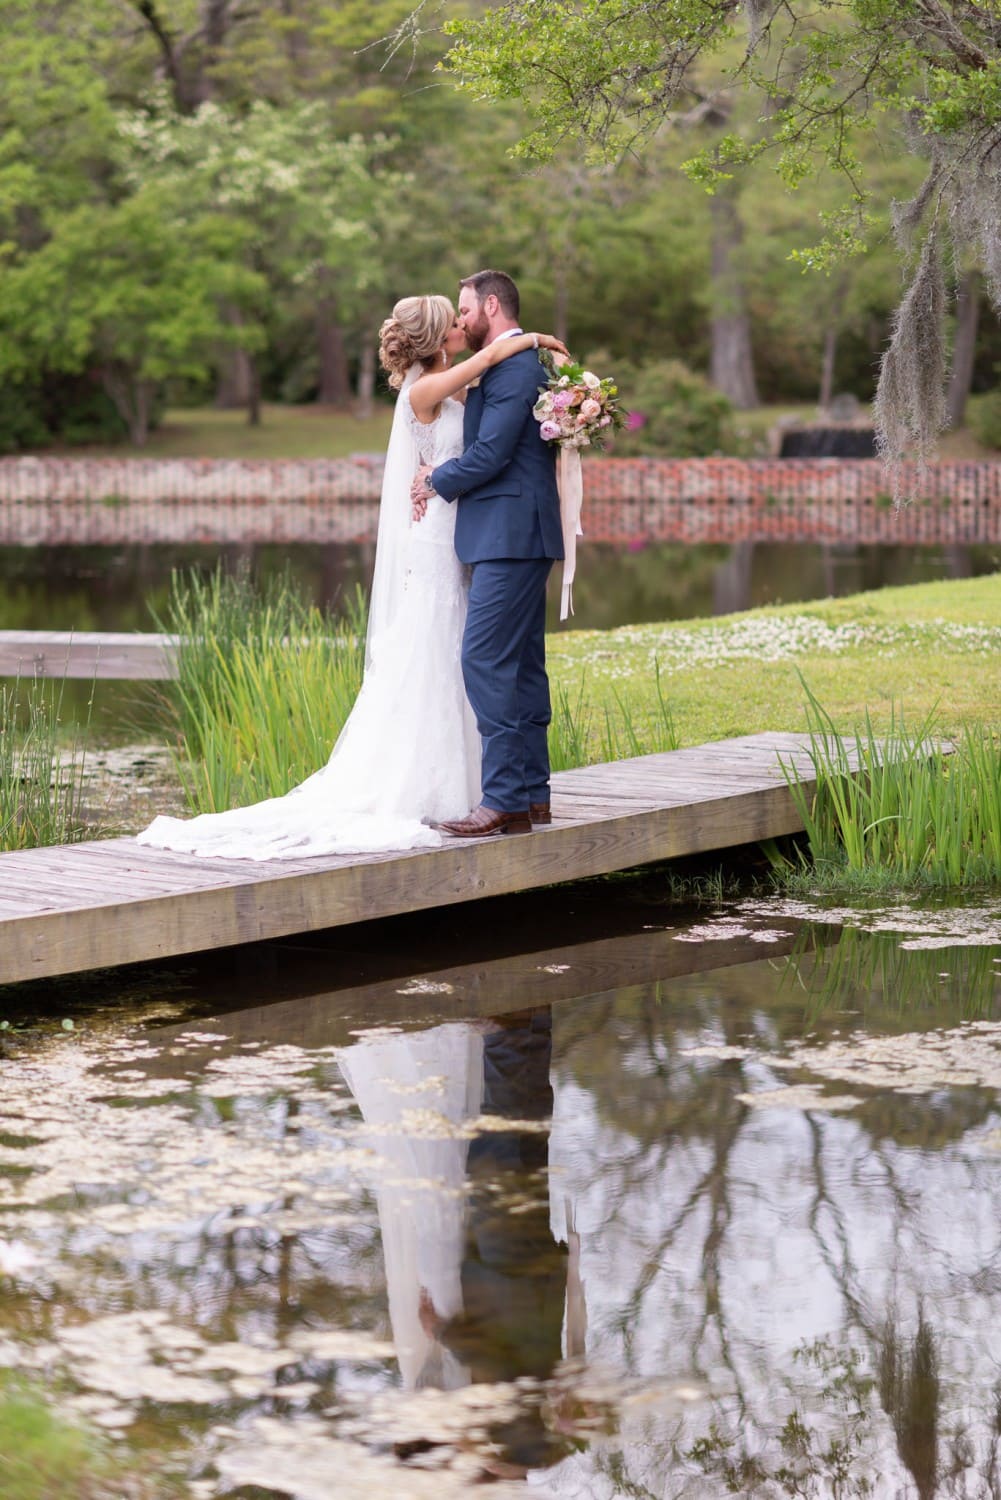 Bride and groom reflecting in the pond by the statue - Brookgreen Gardens